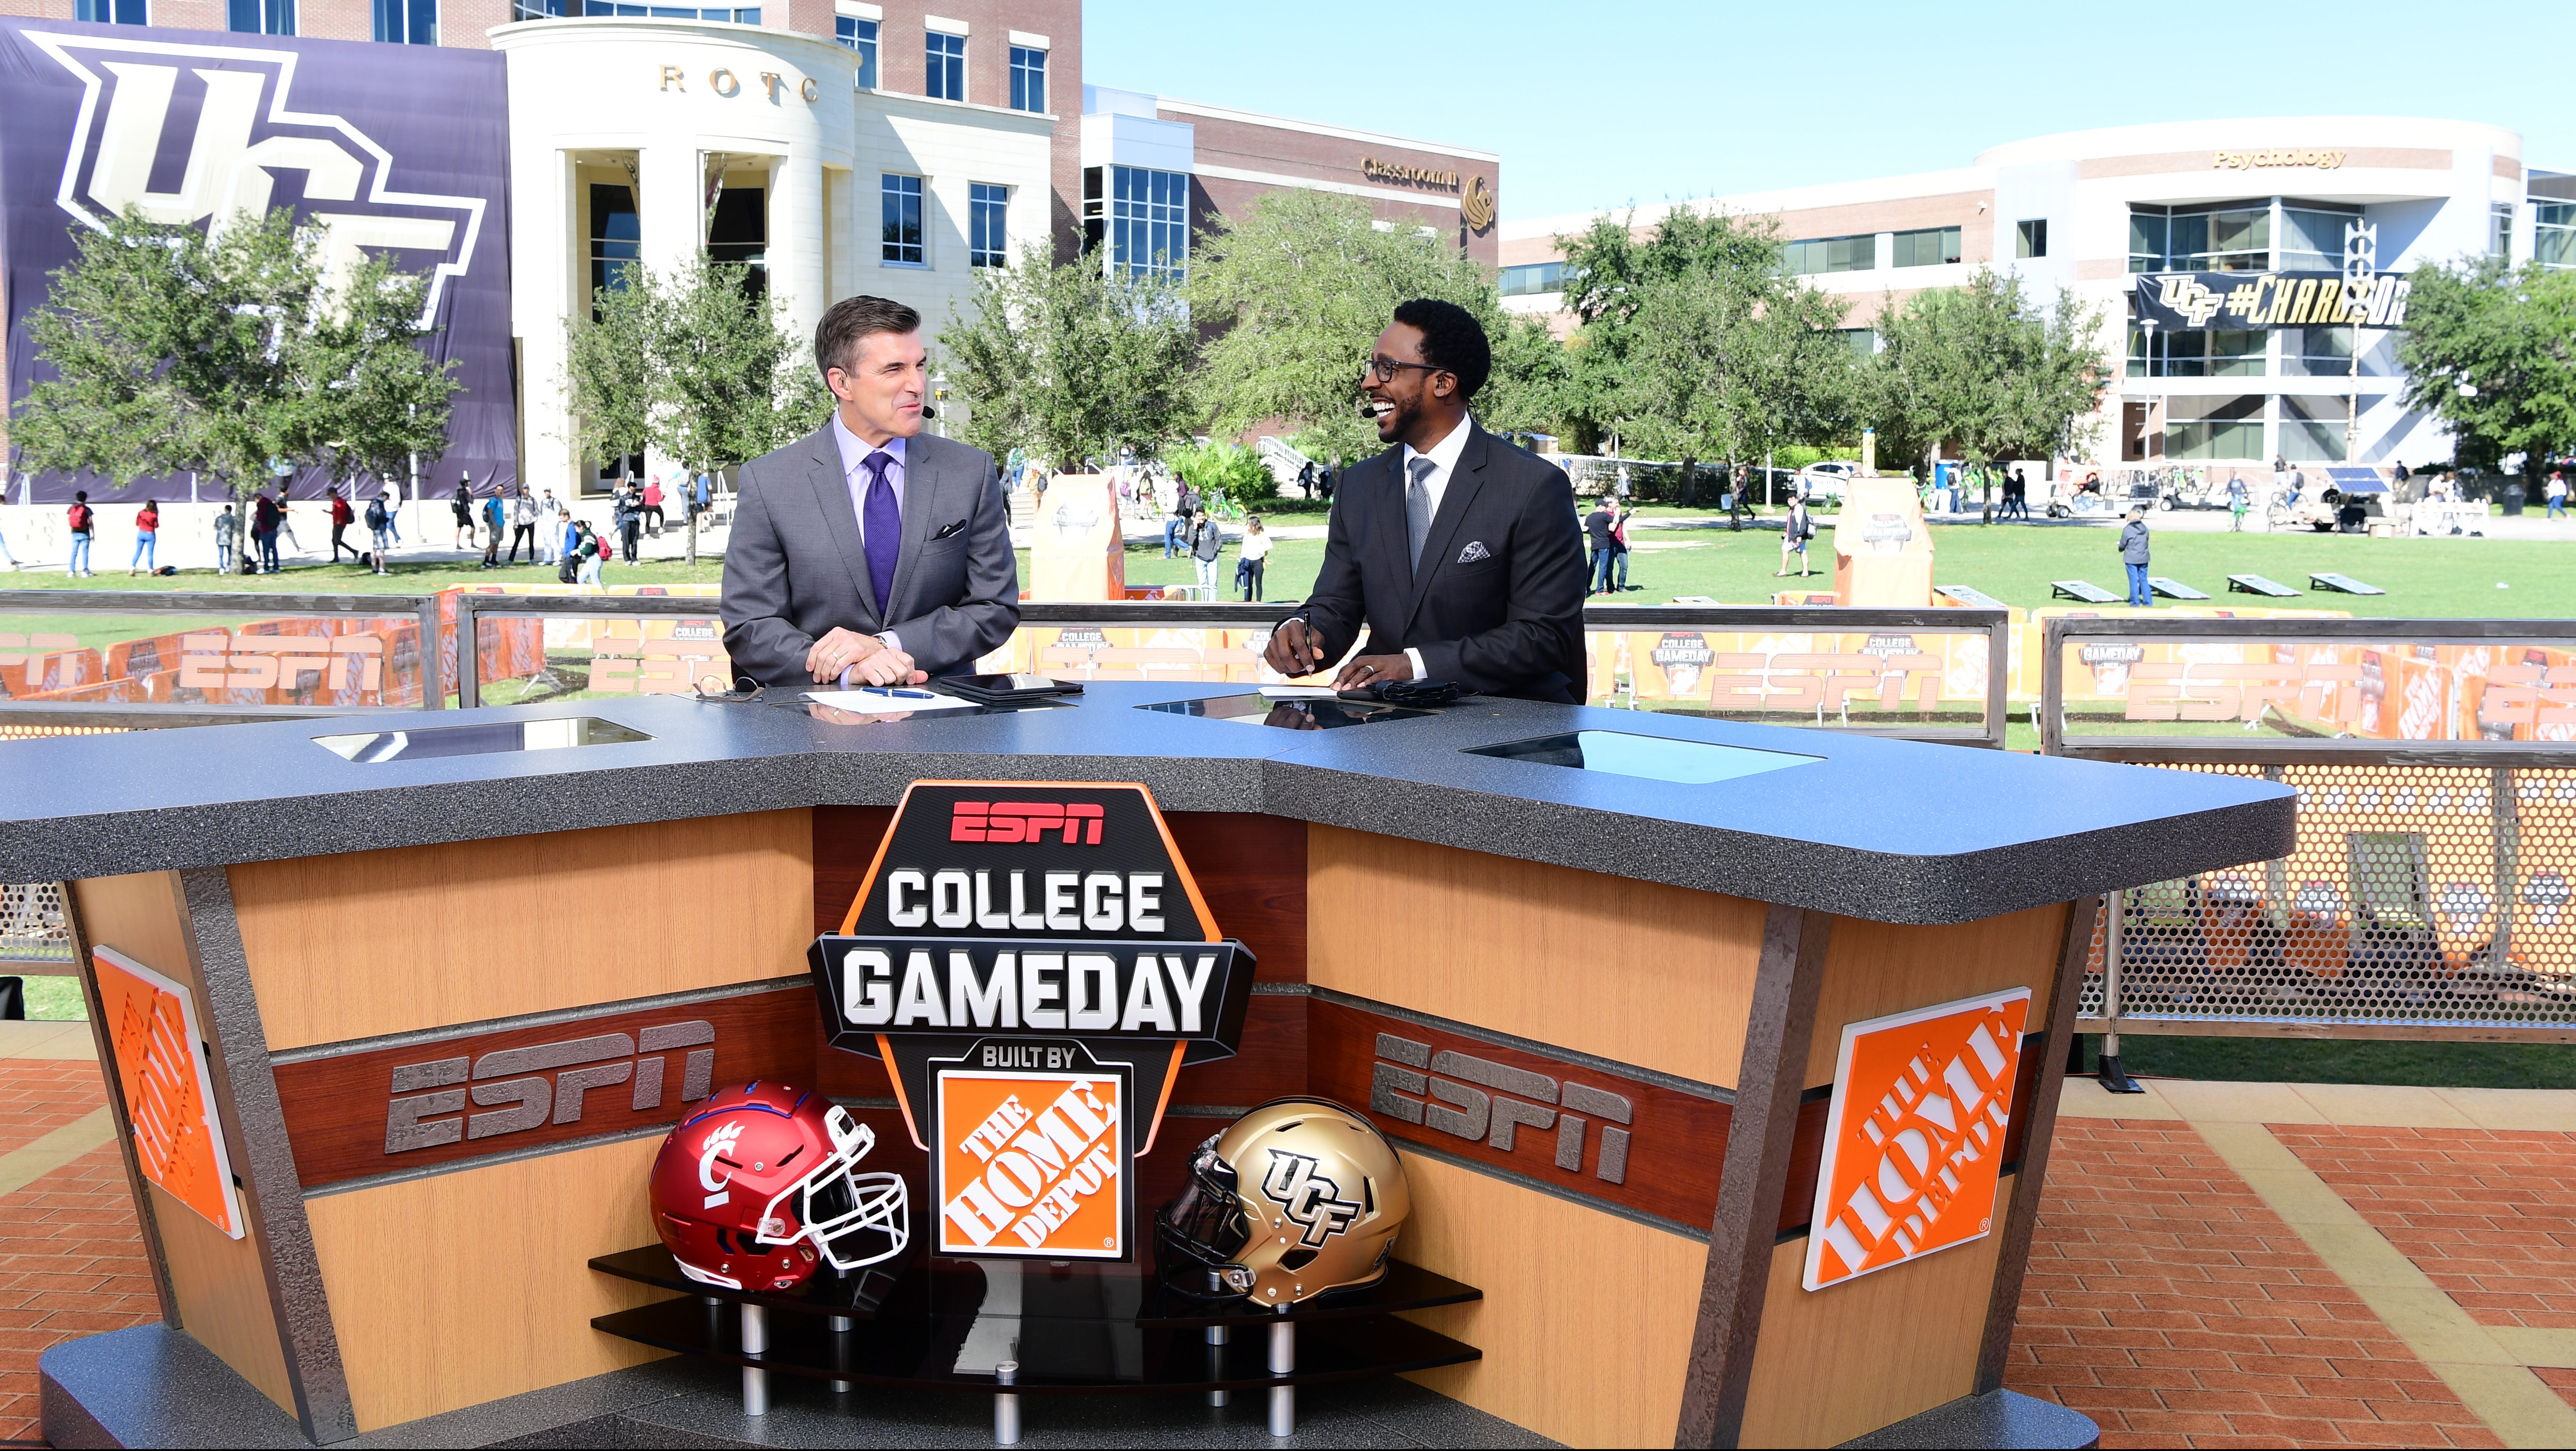 Why Is College Gameday at UCF?